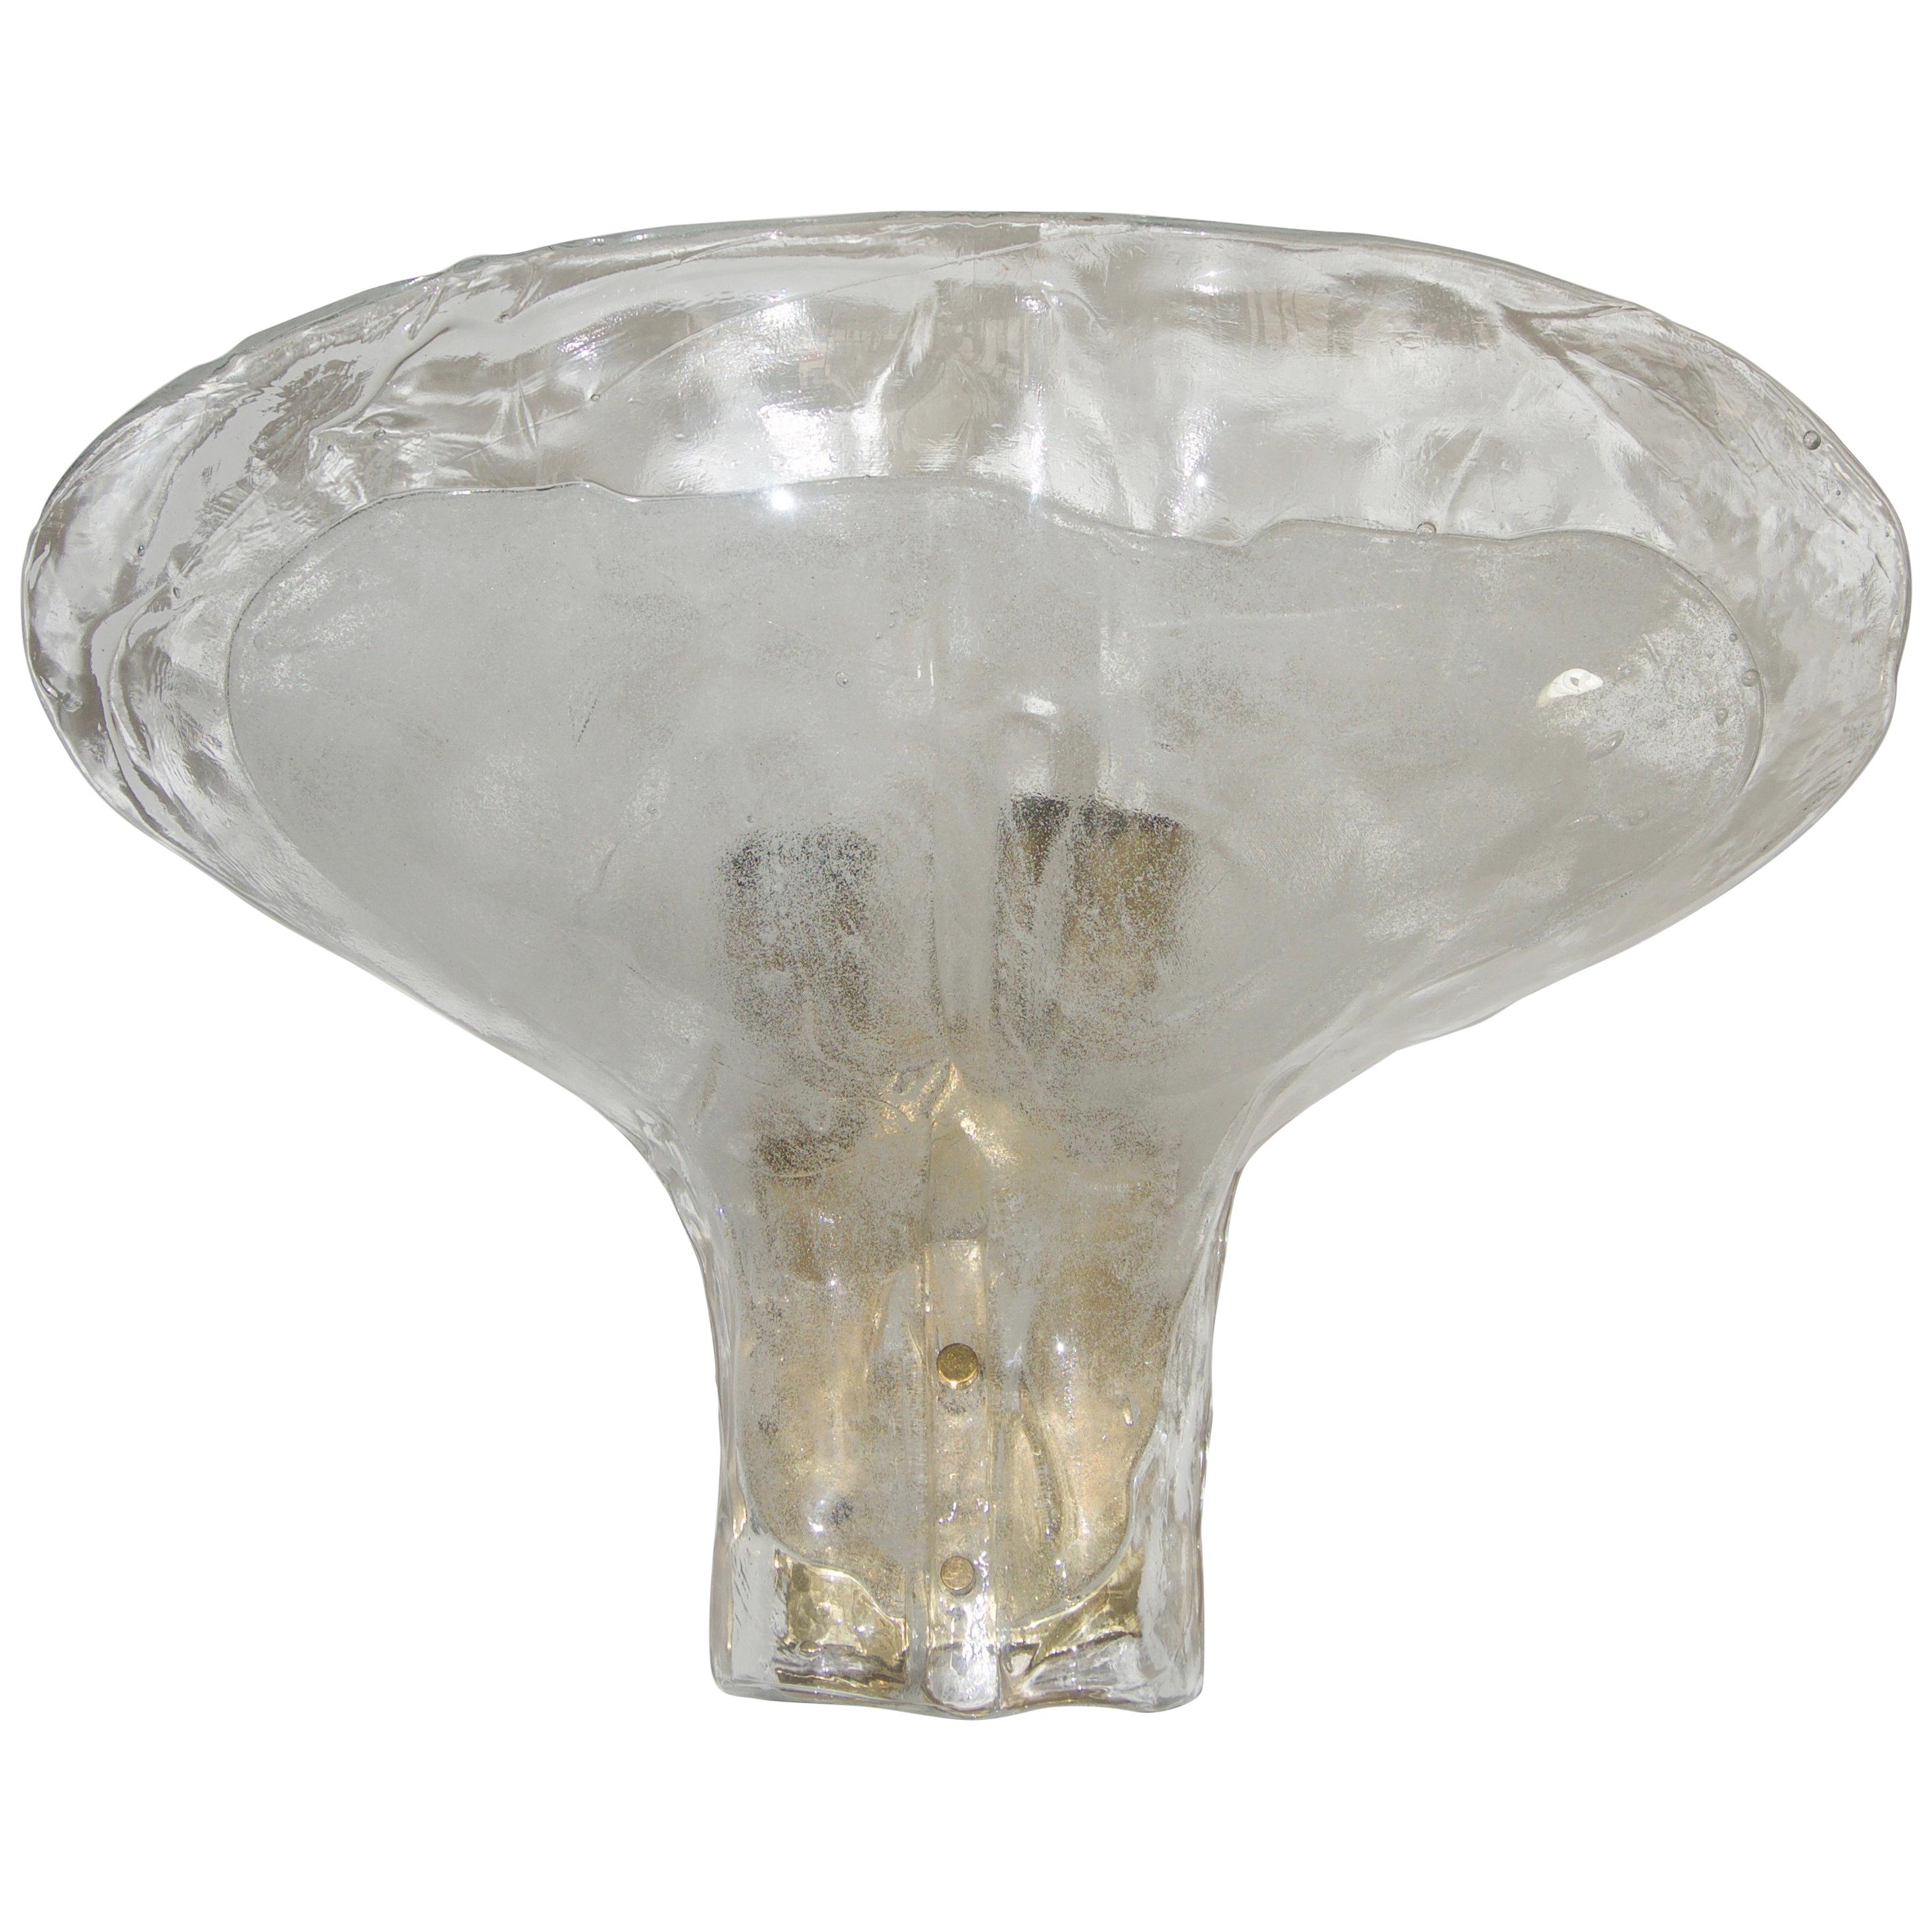 This stylish and chic pair of Kalmar glass wall sconces were acquired from a Palm Beach estate and will make a definite statement in your home.

The Murano glass shades are could be interpreted as flower petals or perhaps an upturned whale's